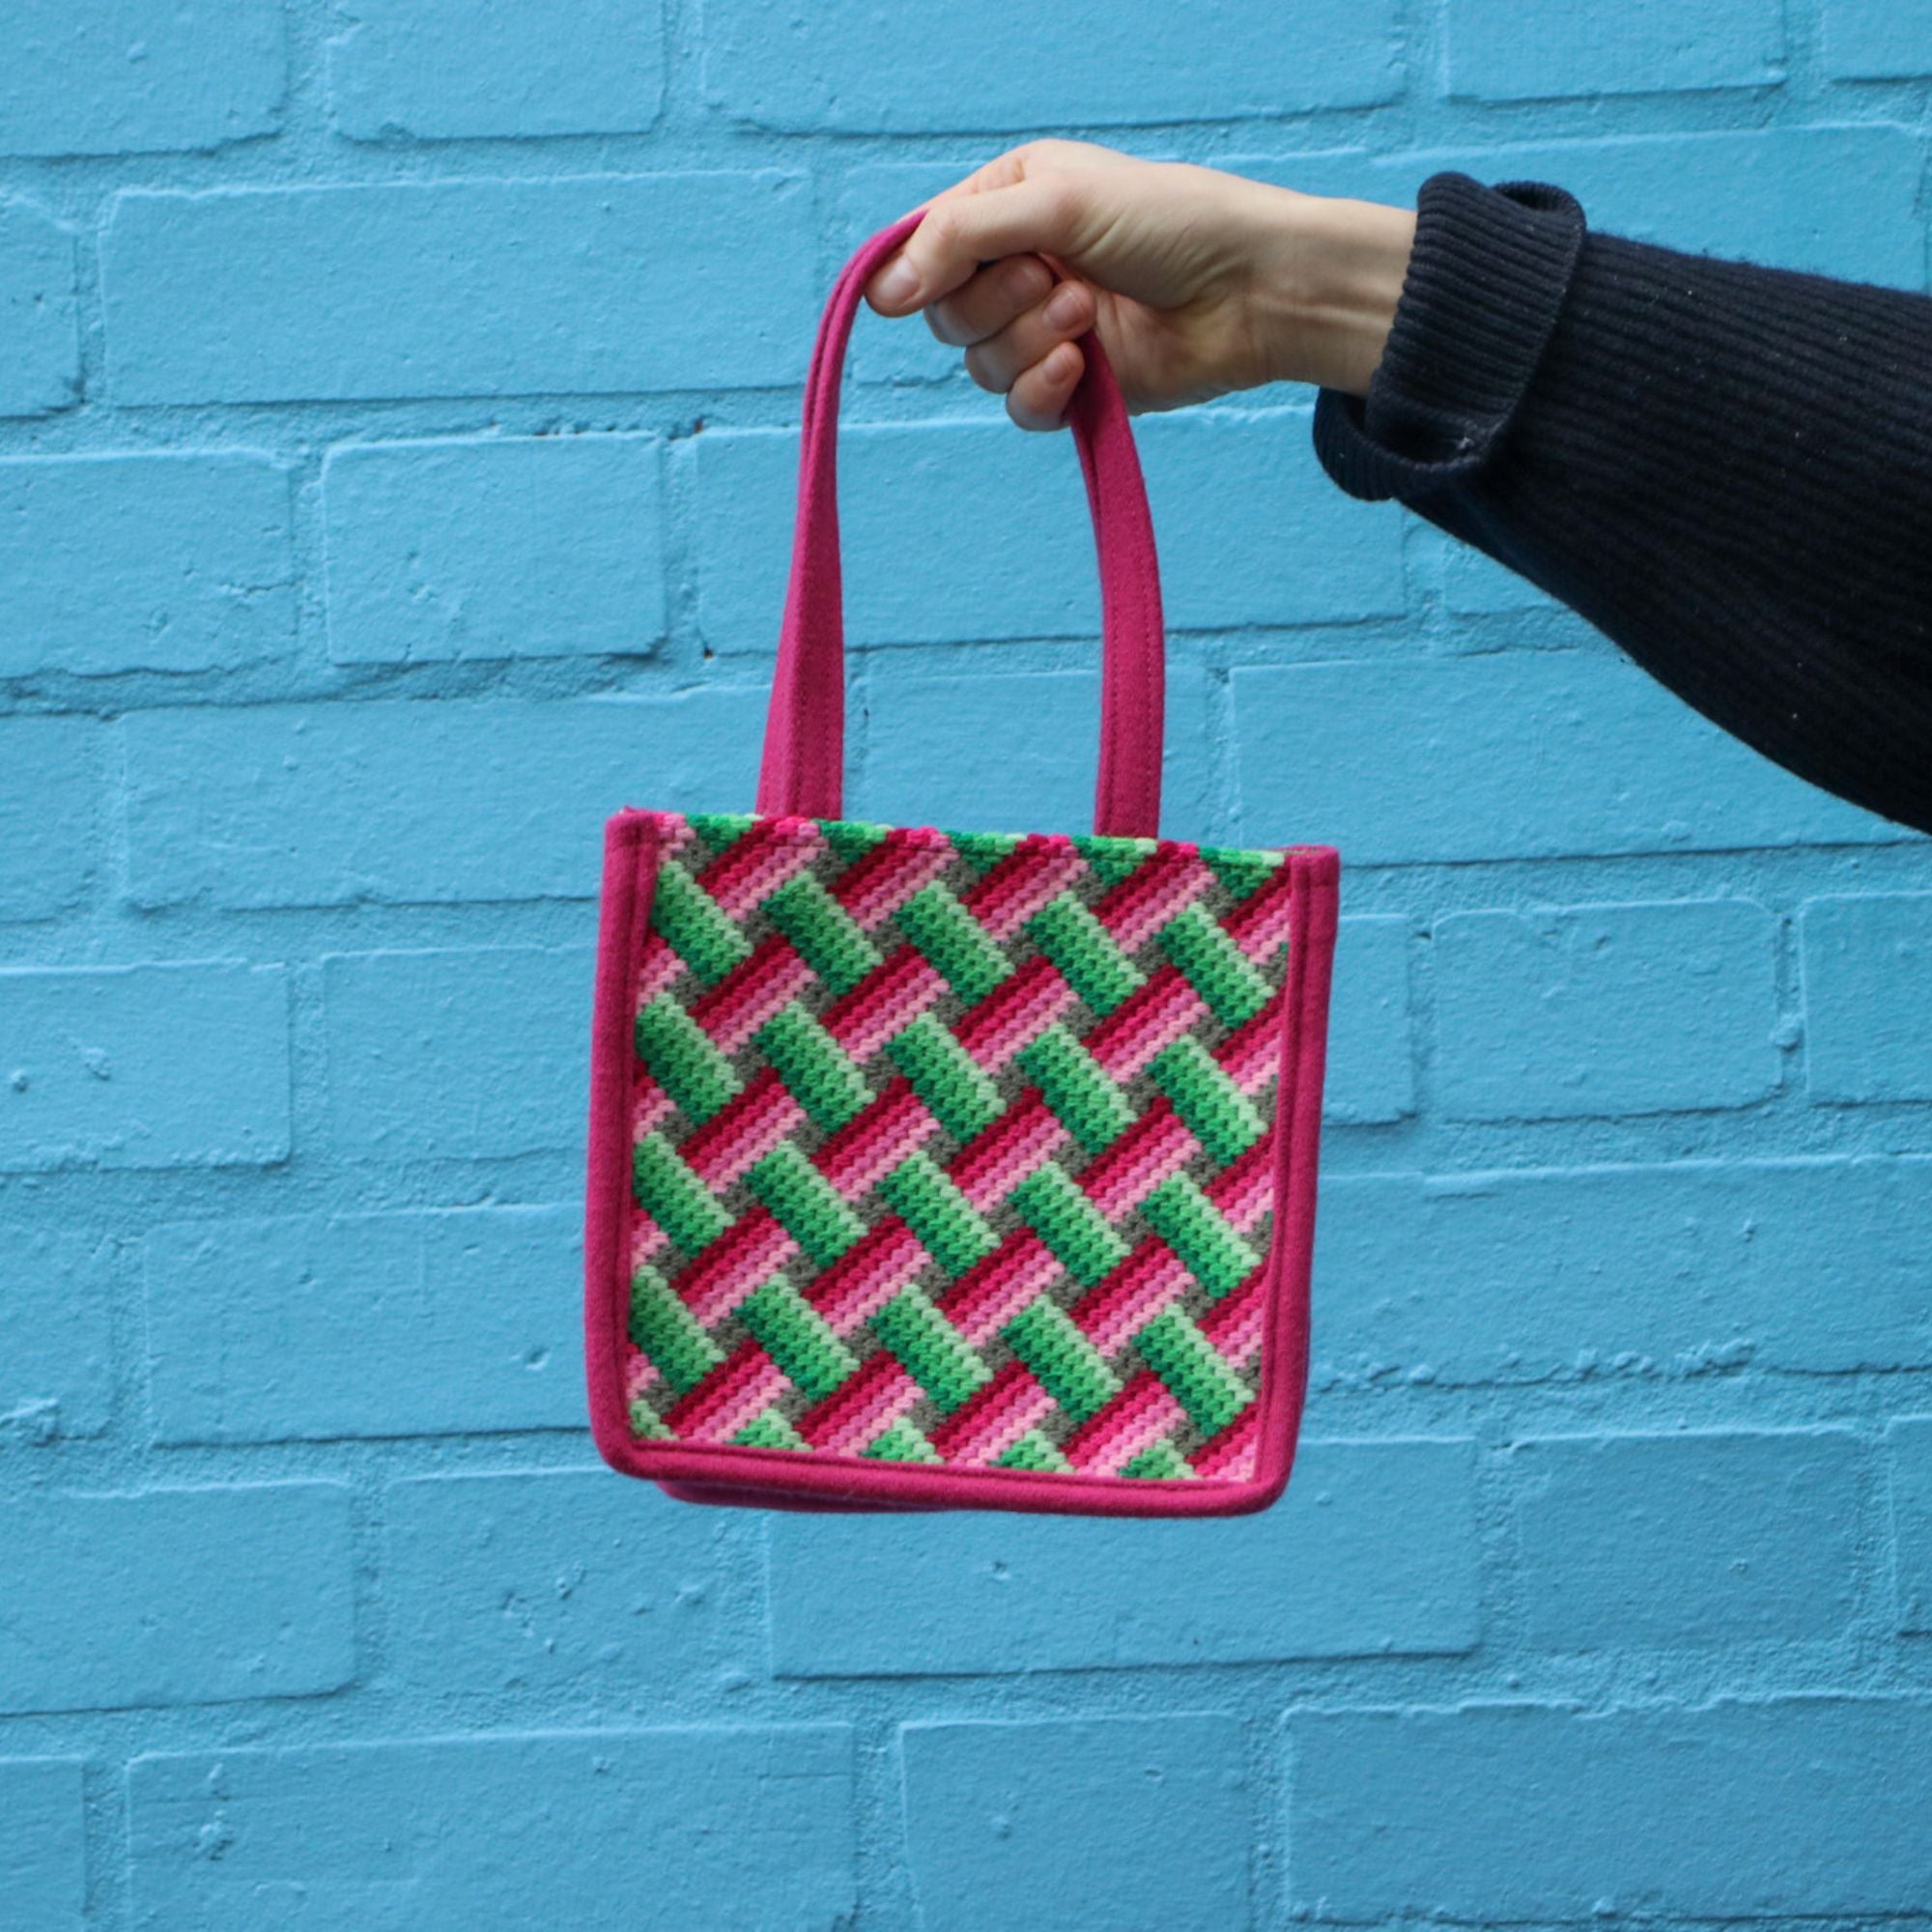 Bargello Needlepoint Bag in Pink and Green